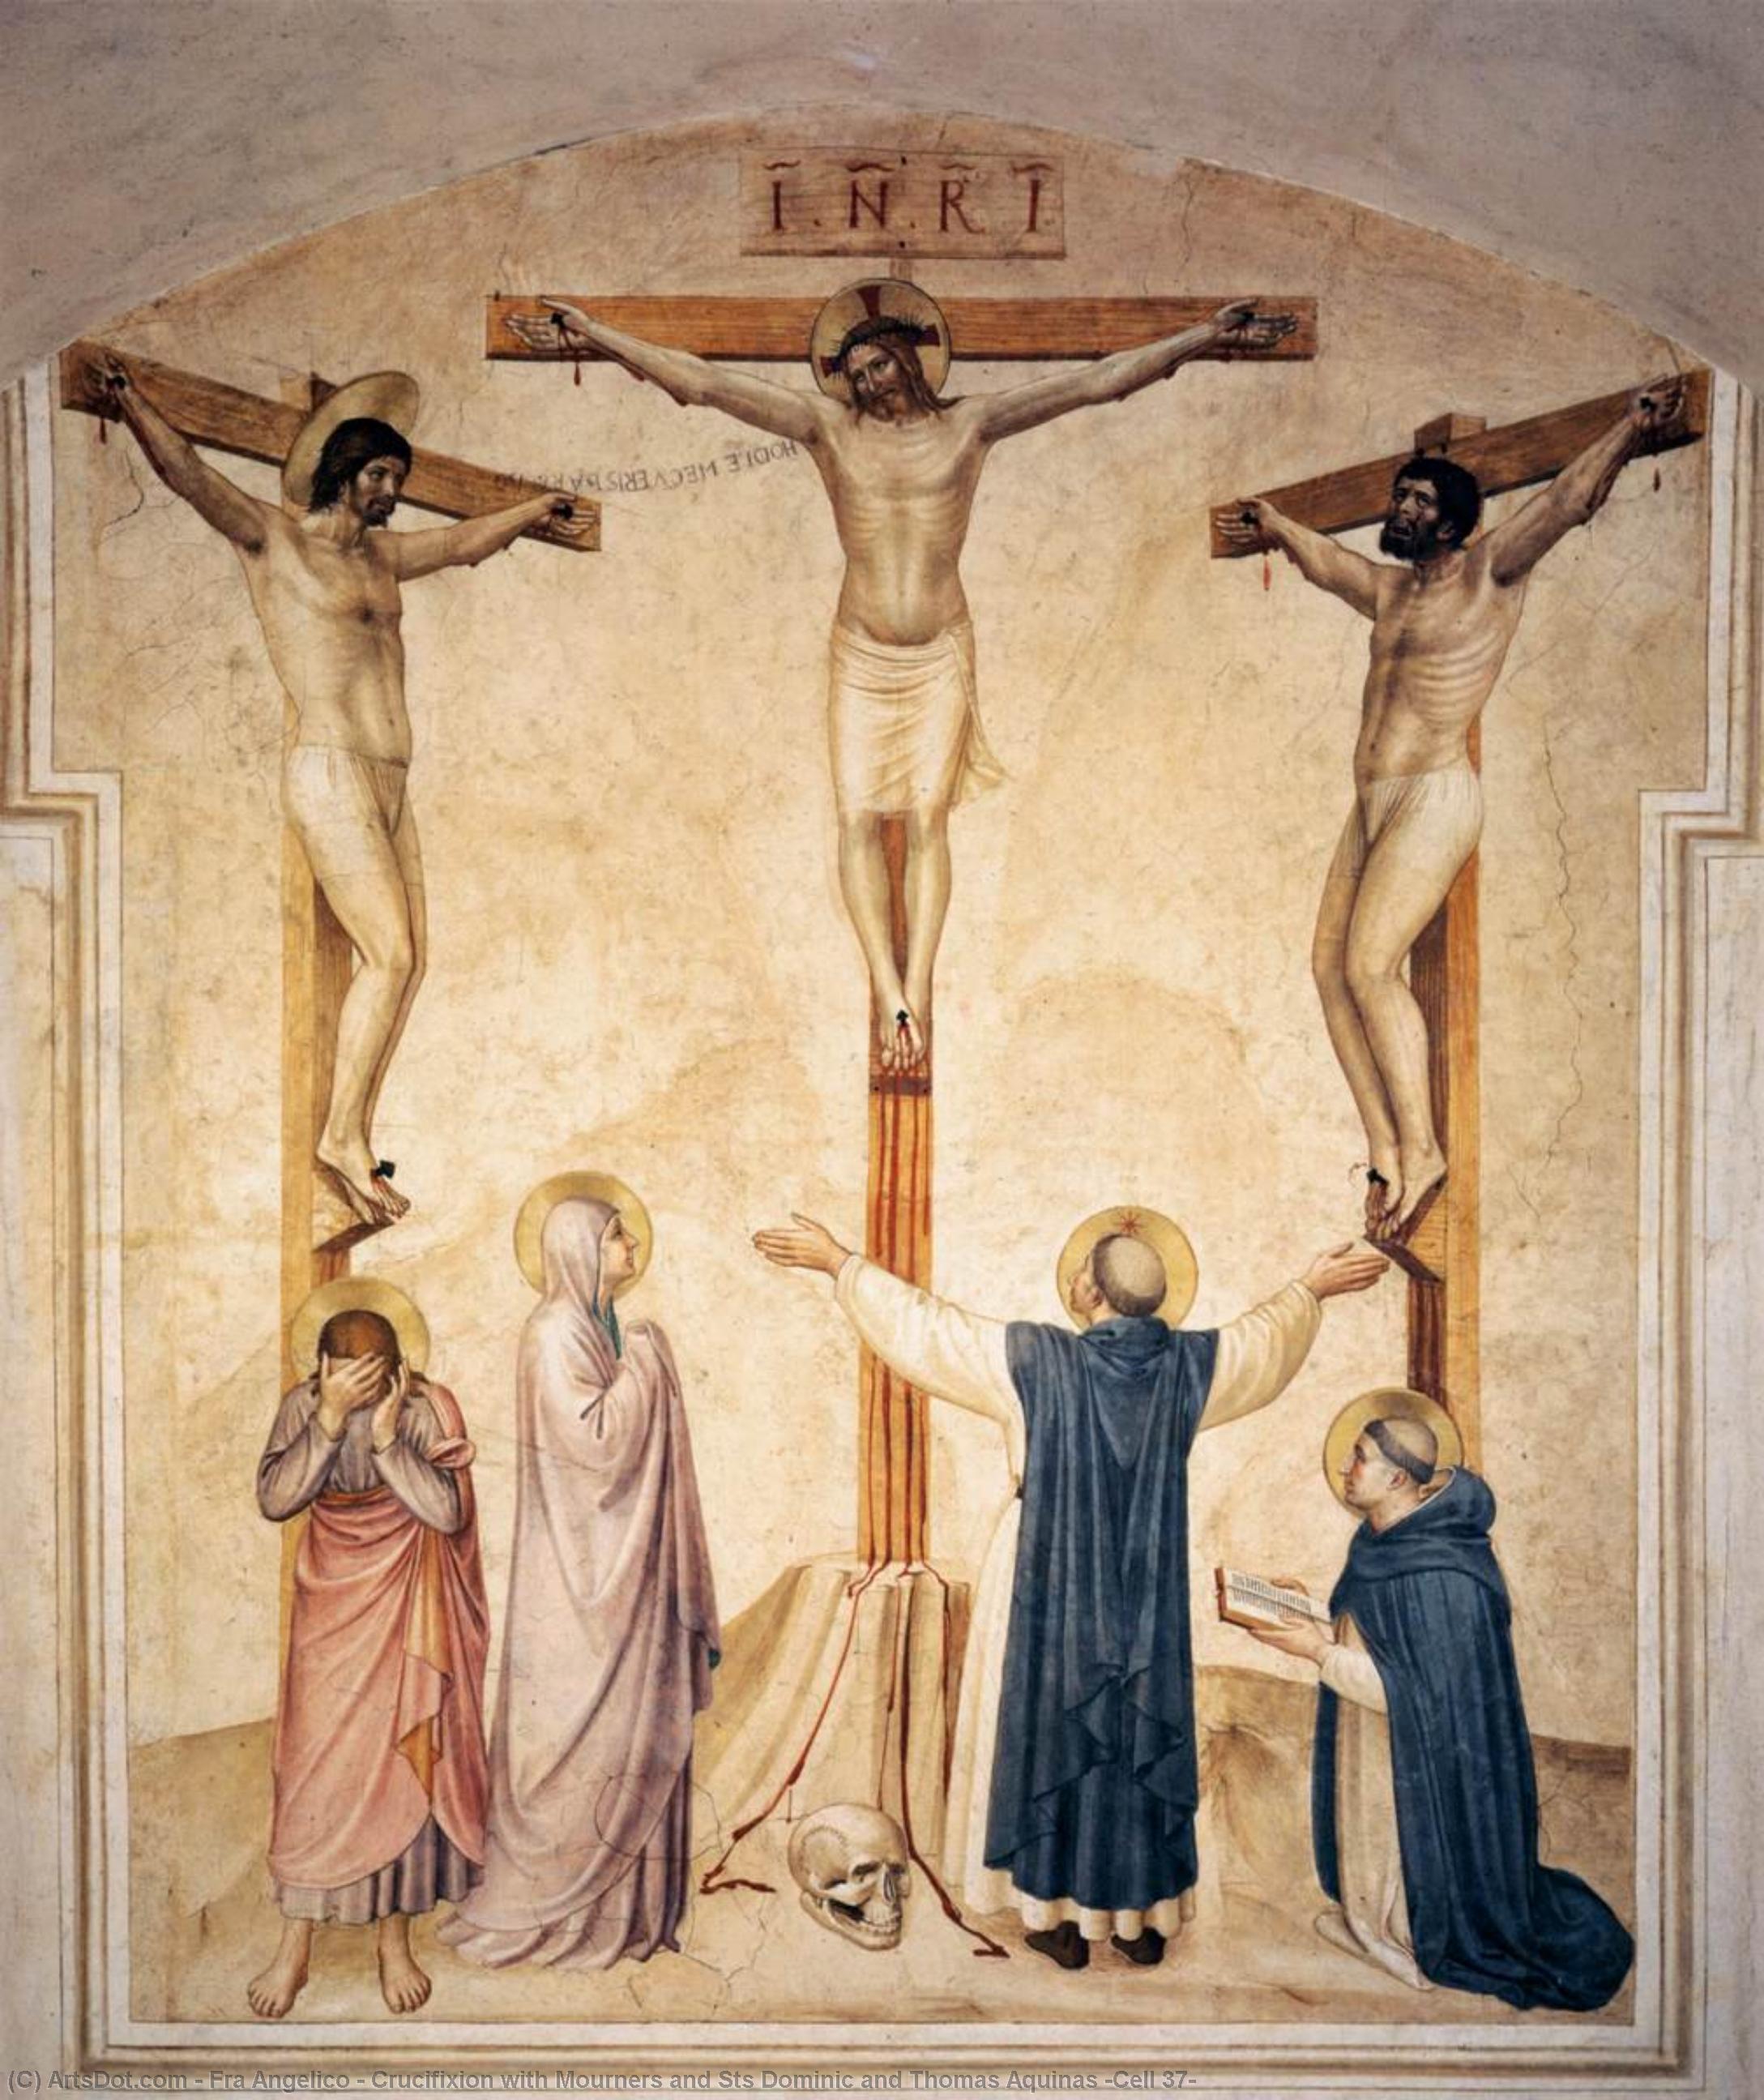 Wikioo.org - สารานุกรมวิจิตรศิลป์ - จิตรกรรม Fra Angelico - Crucifixion with Mourners and Sts Dominic and Thomas Aquinas (Cell 37)